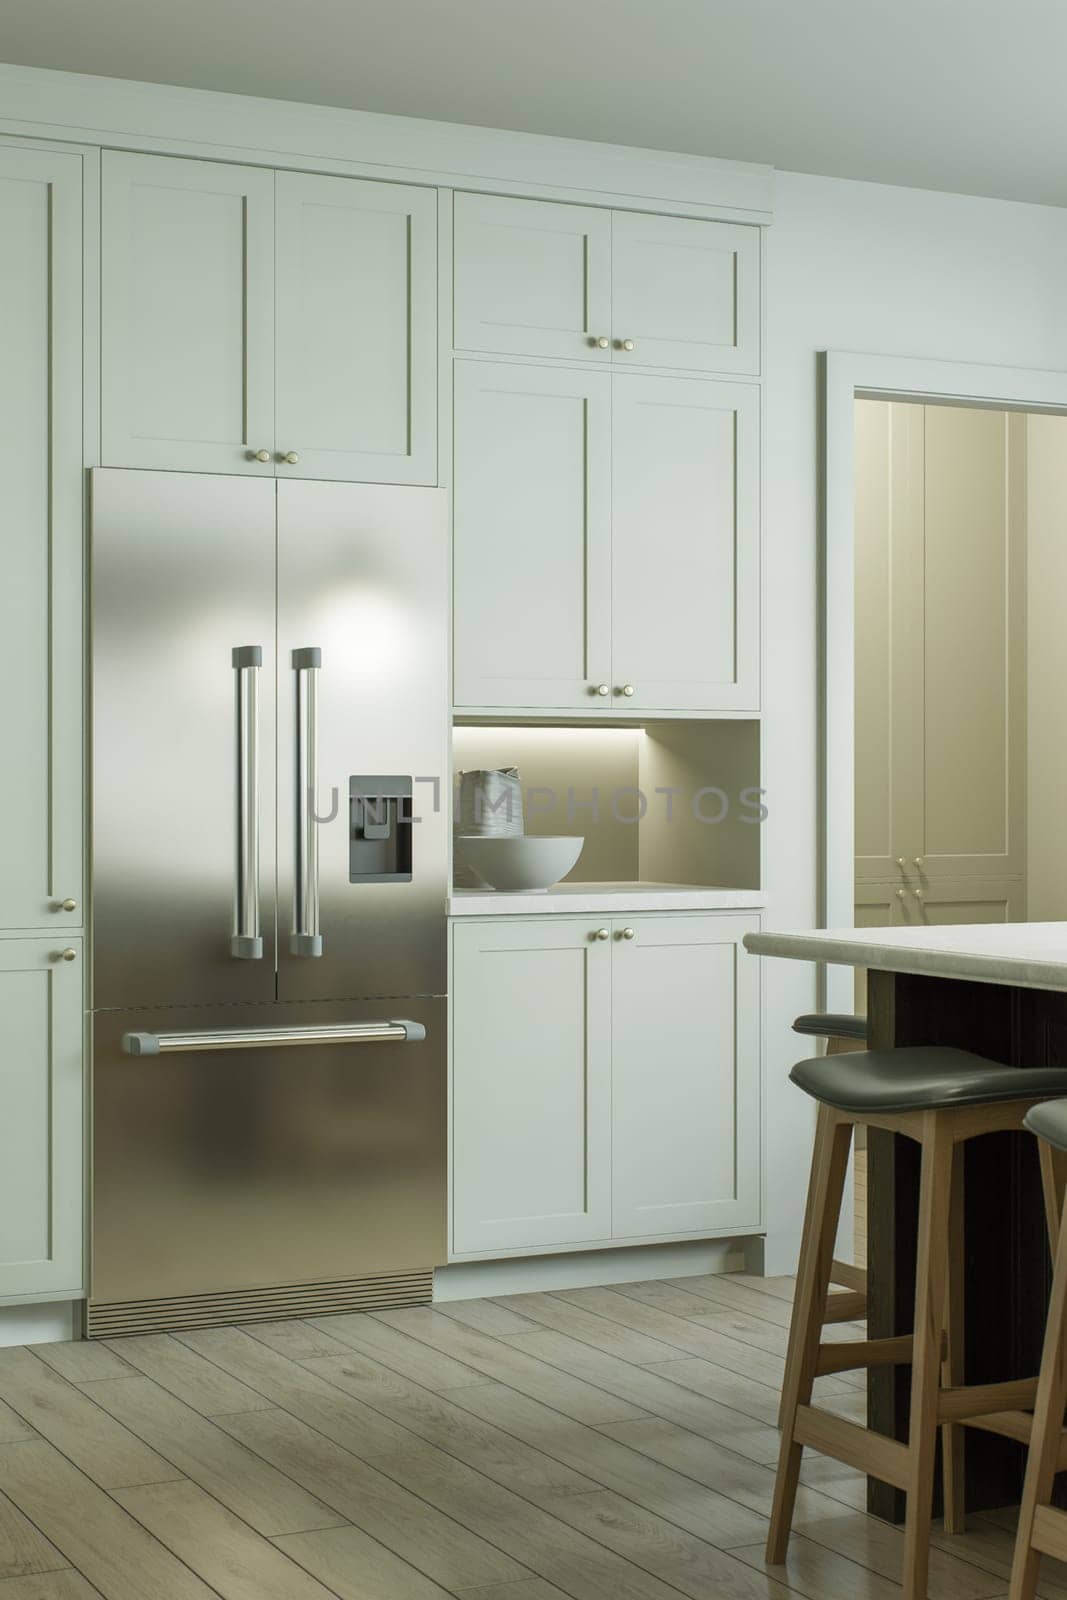 Focus on the large two-door refrigerator in the kitchen. by N_Design